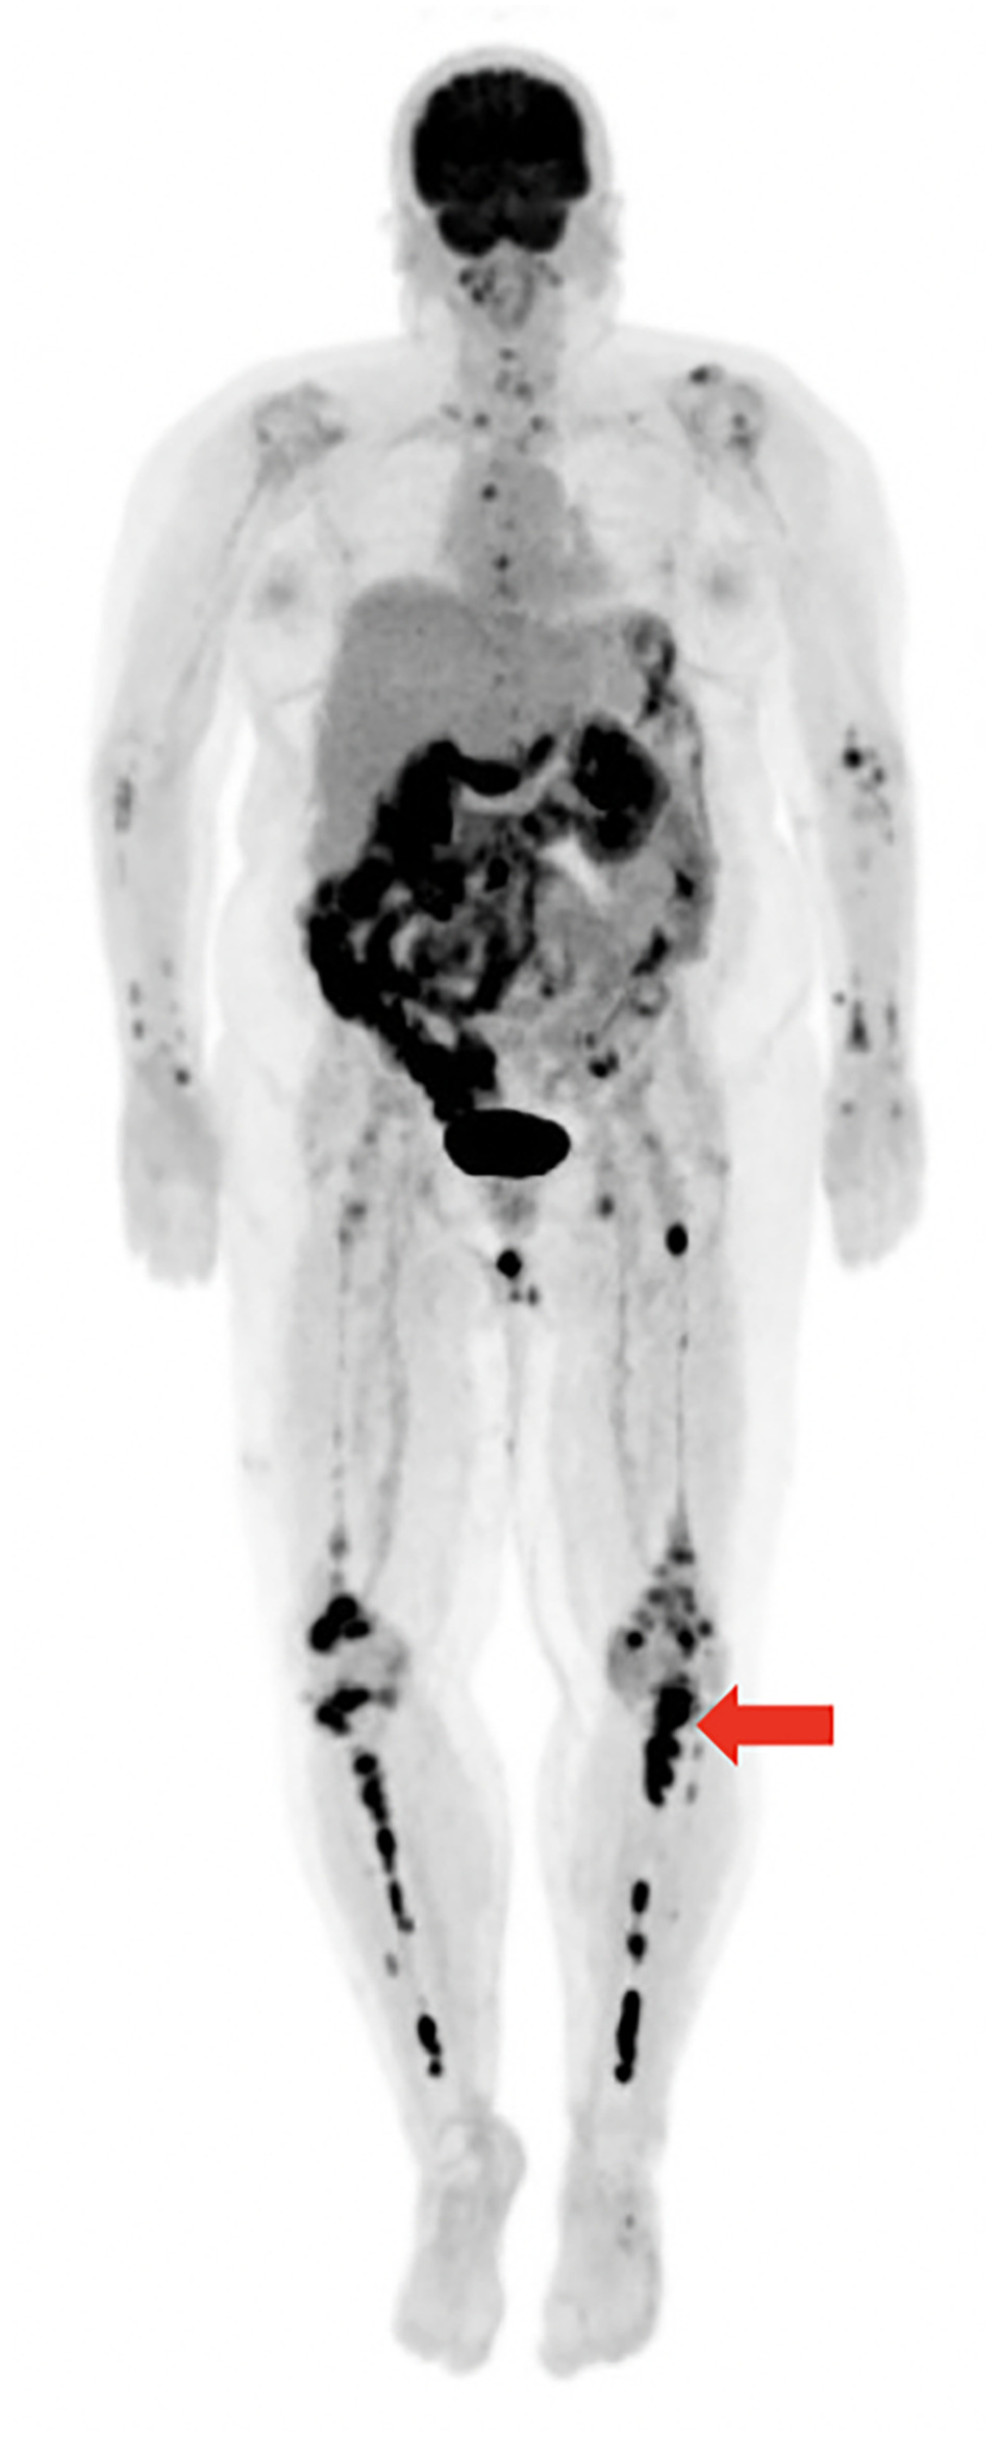 PET/CT scan showing innumerable foci of 18F-FDG-avid lesions throughout the axial and appendicular skeleton (example lesion denoted by arrow).